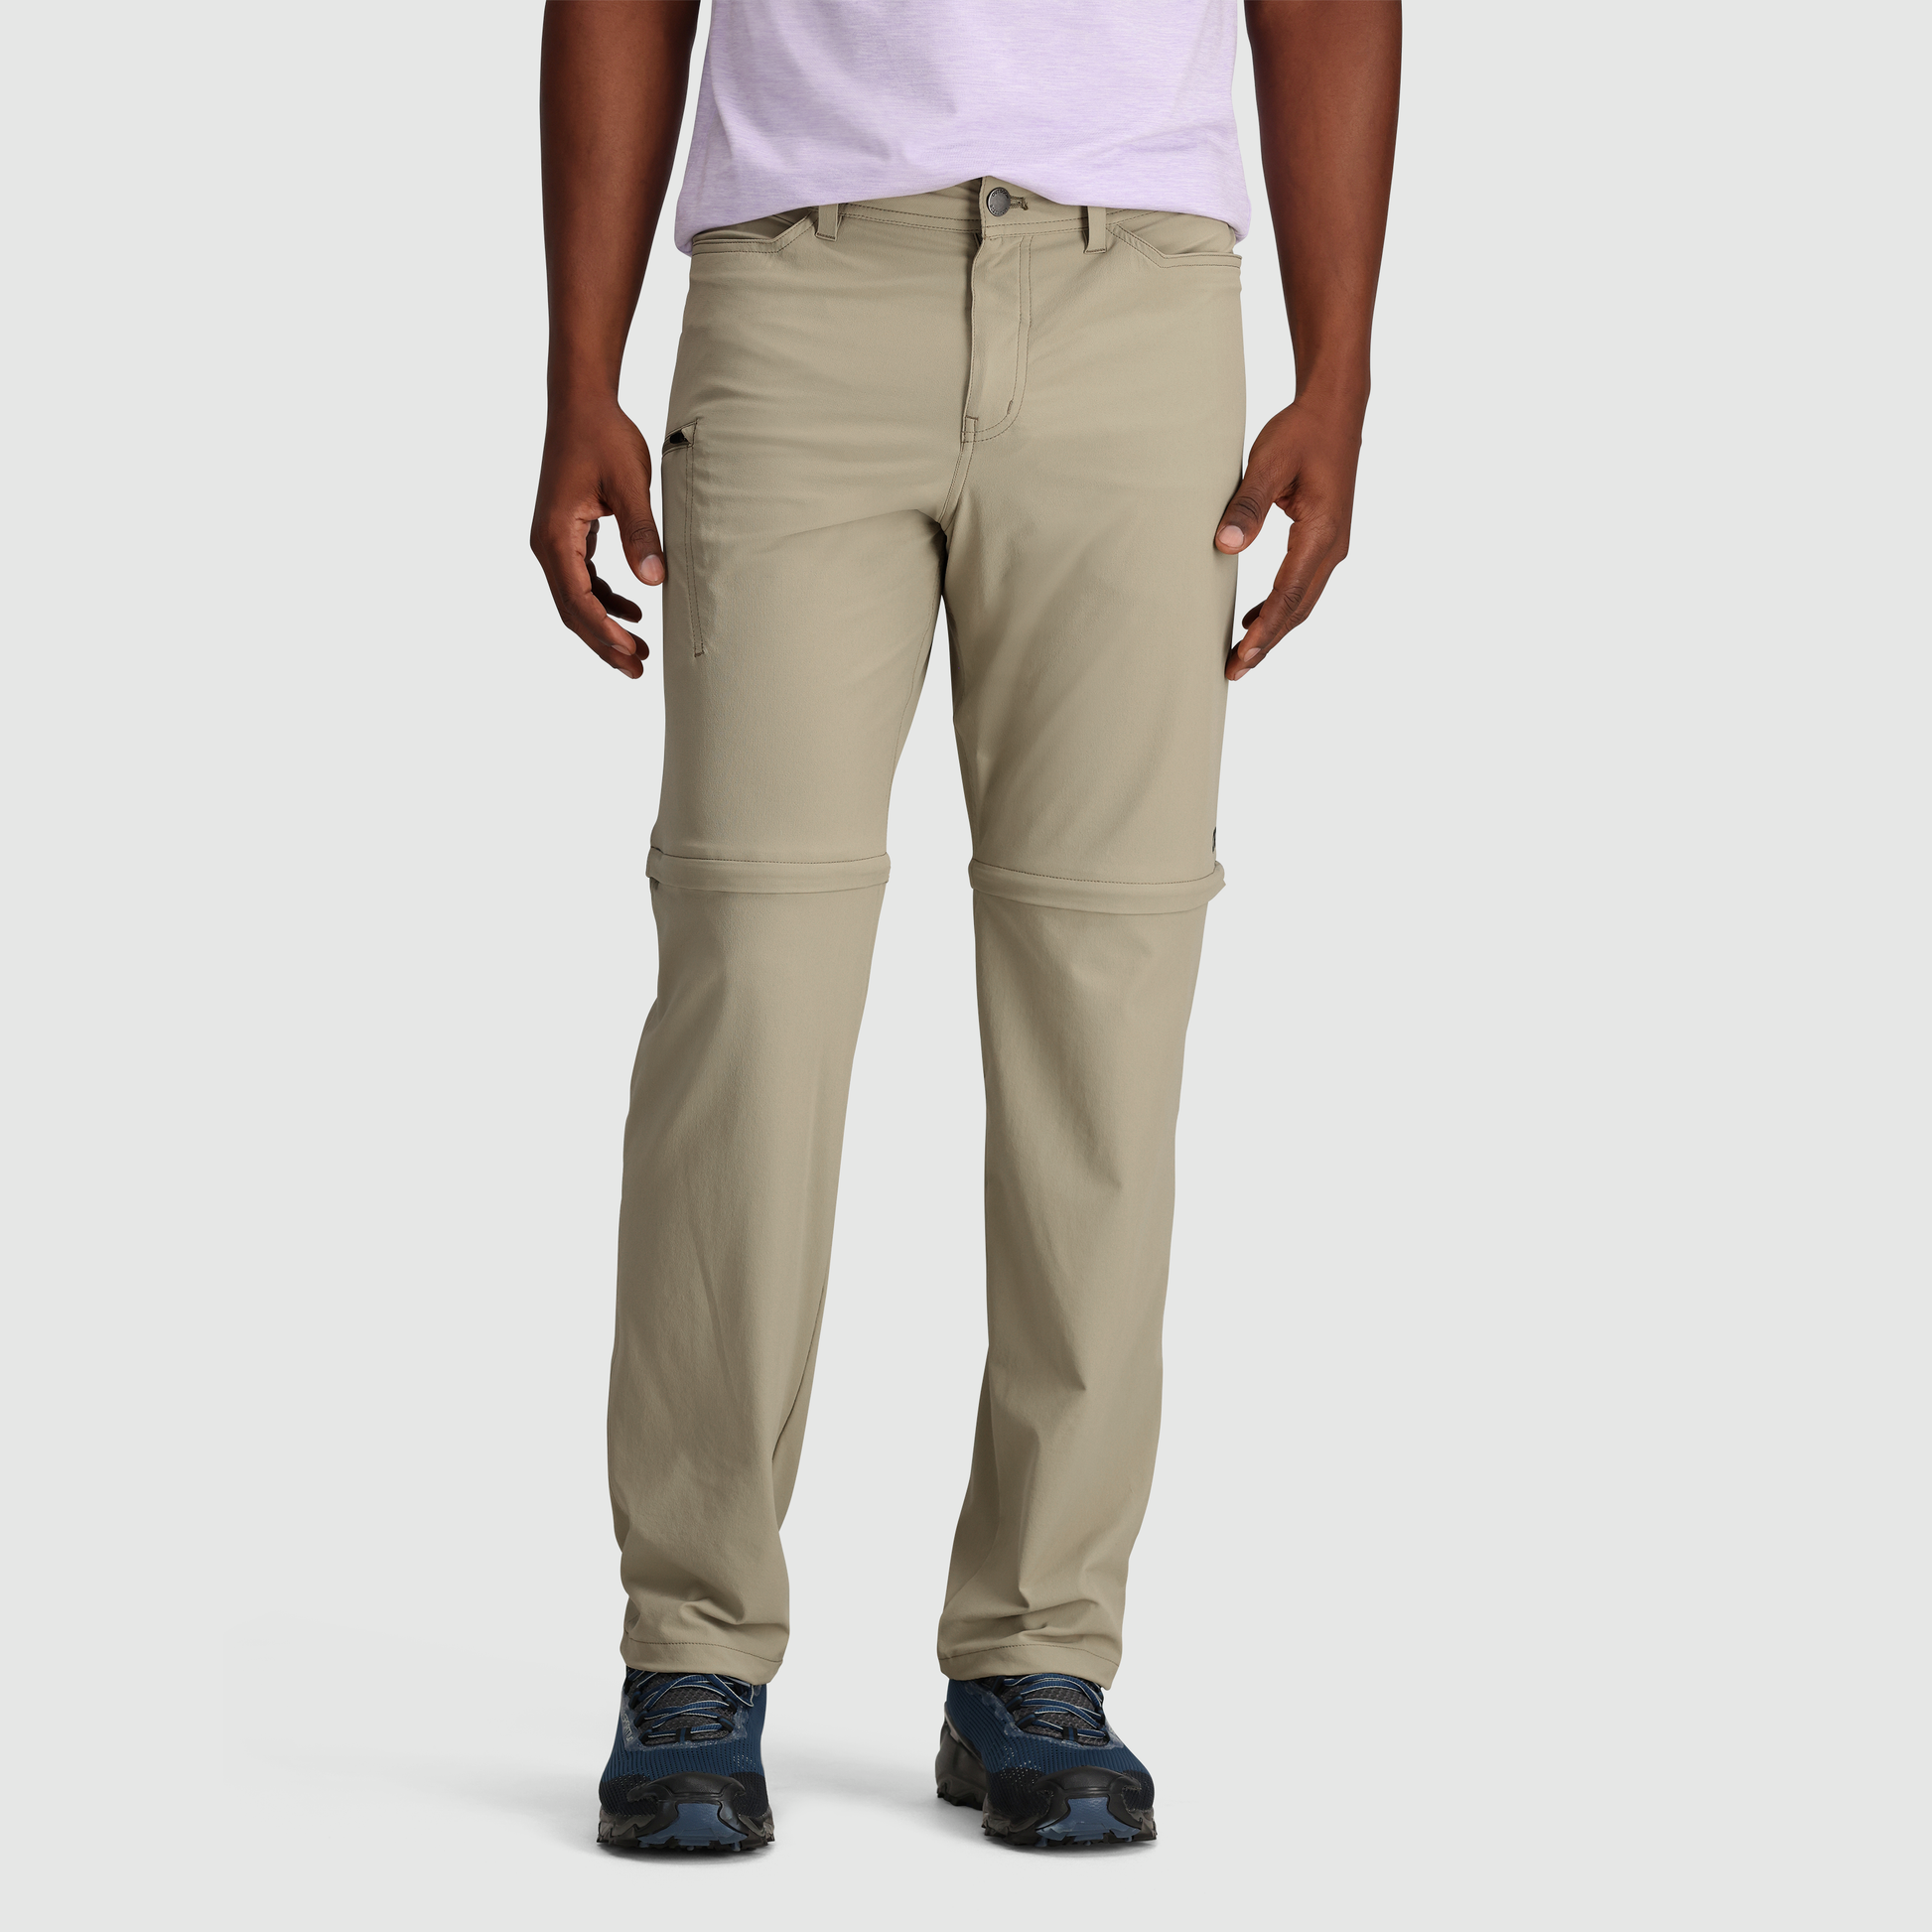 Men's Stretcher Khaki Trousers in Central Division - Clothing